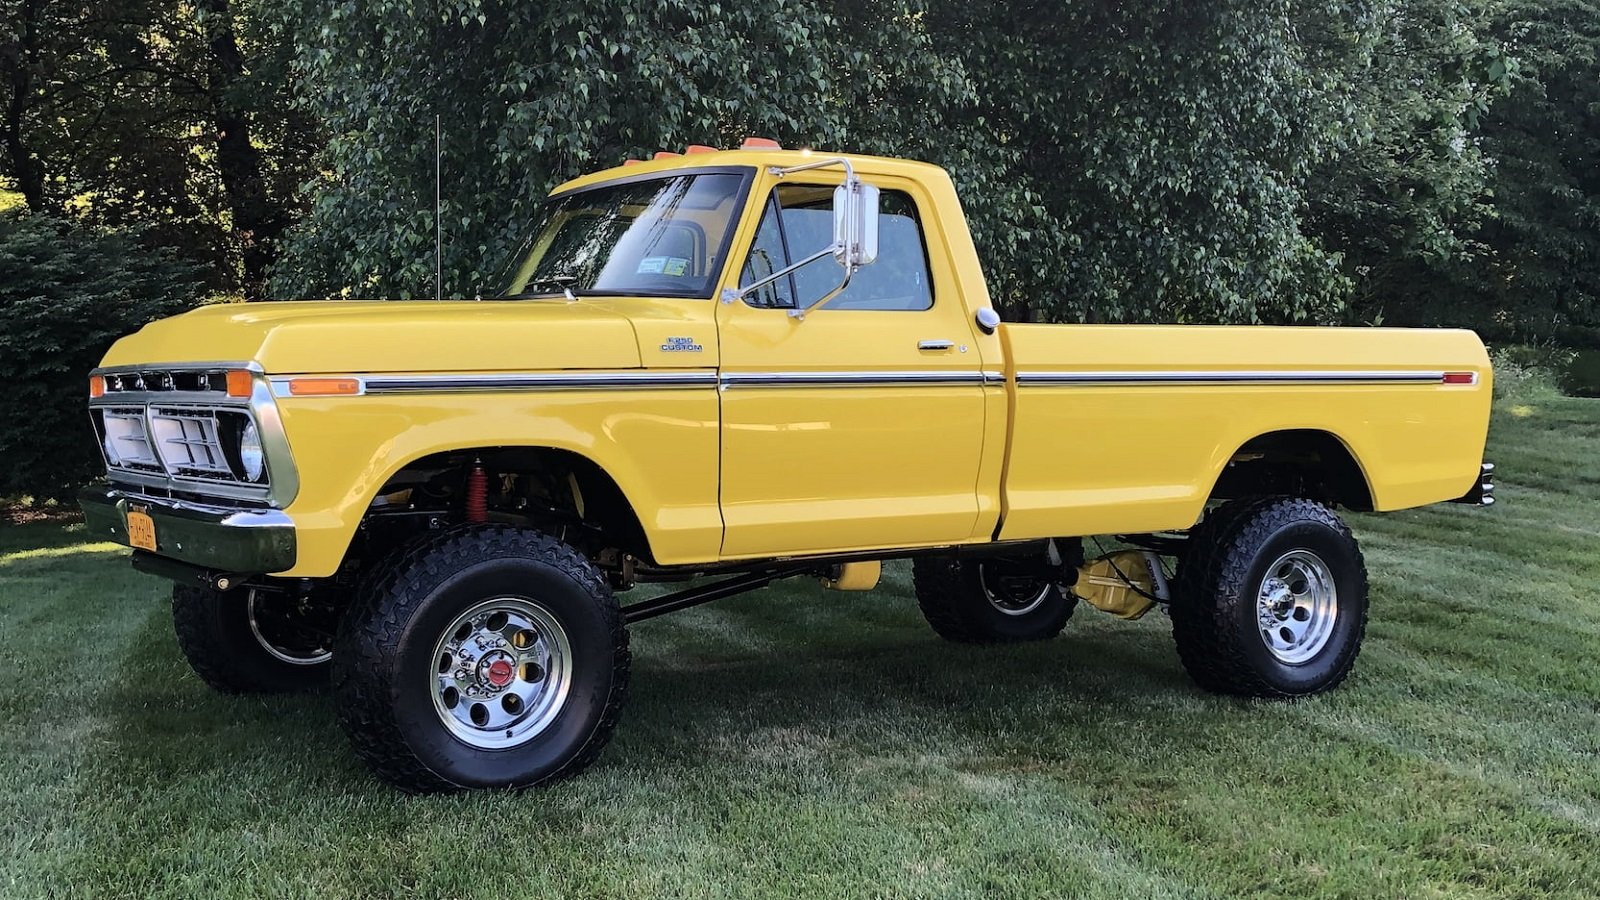 Big Yellow Ford F 250 Looks Ready To Impress Ford Daily Trucks